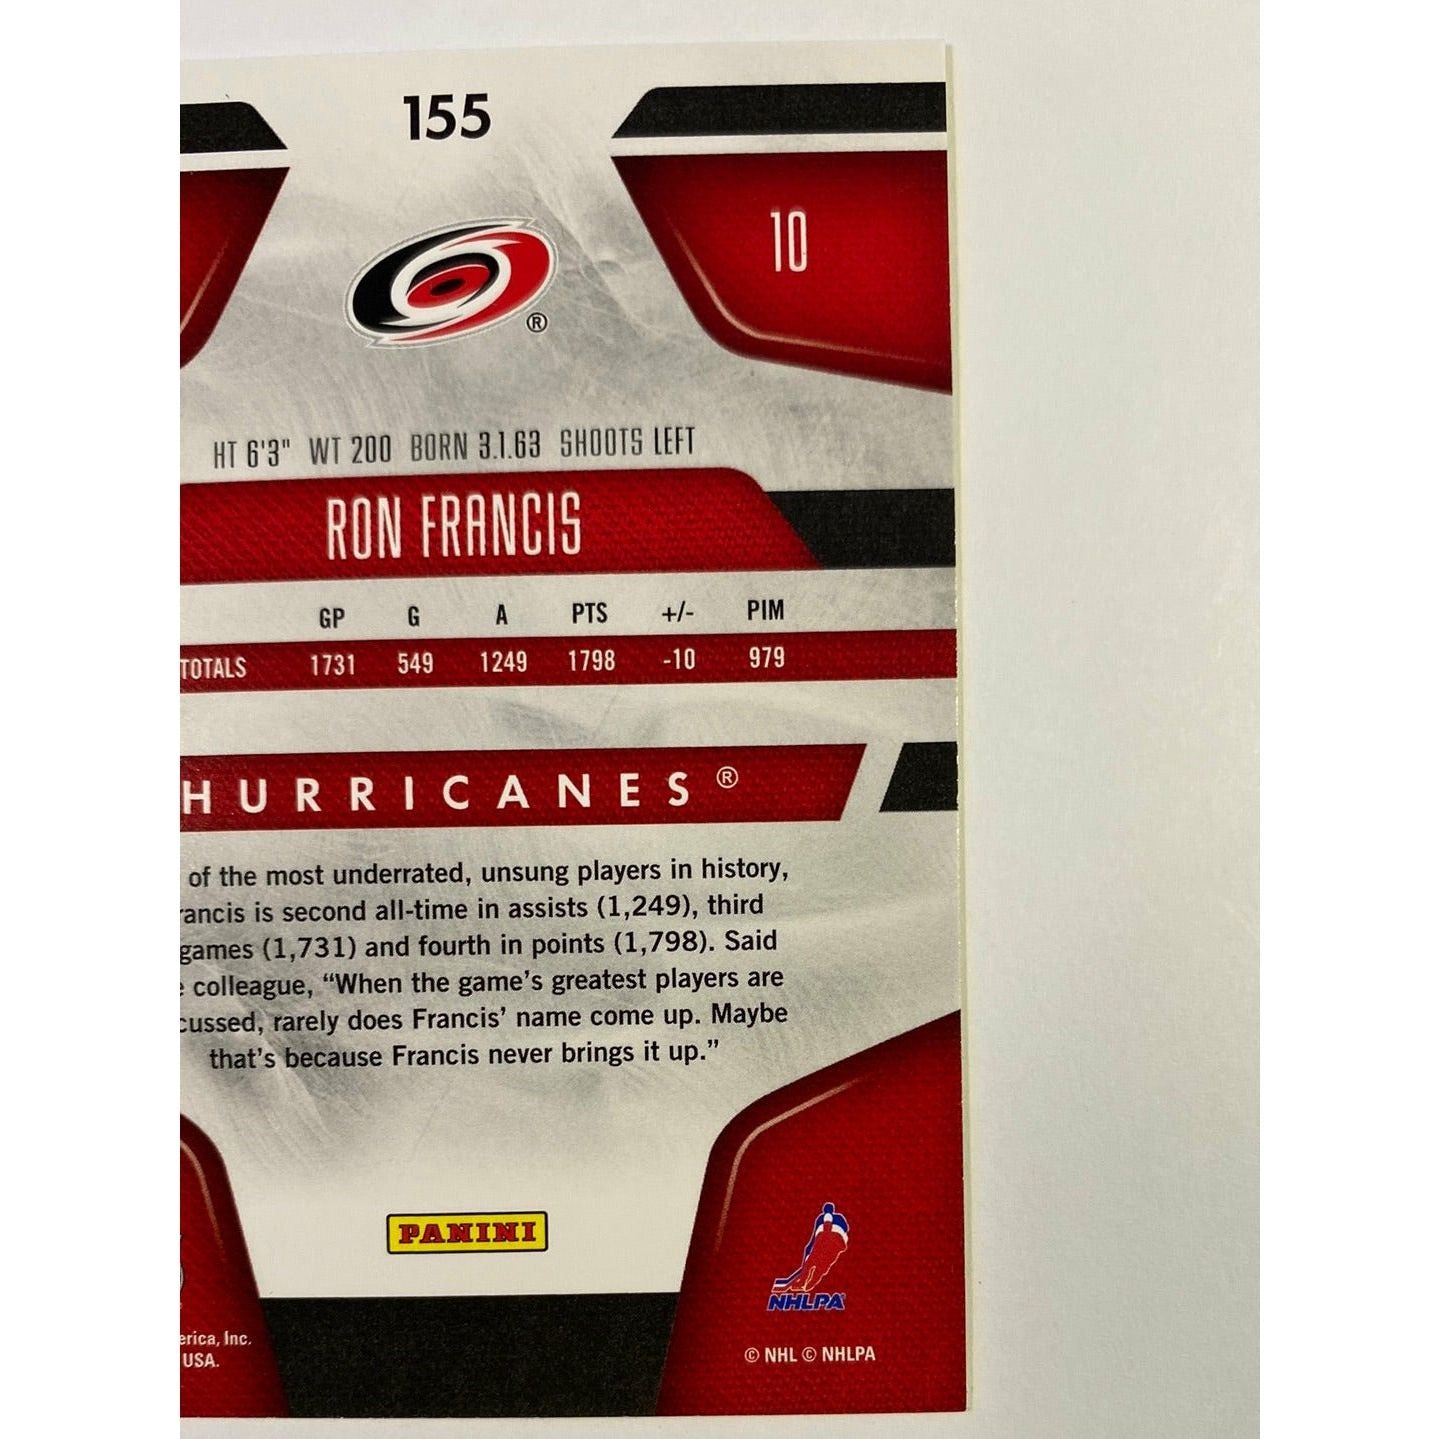 2011-12 Panini Certified Immortals Ron Francis